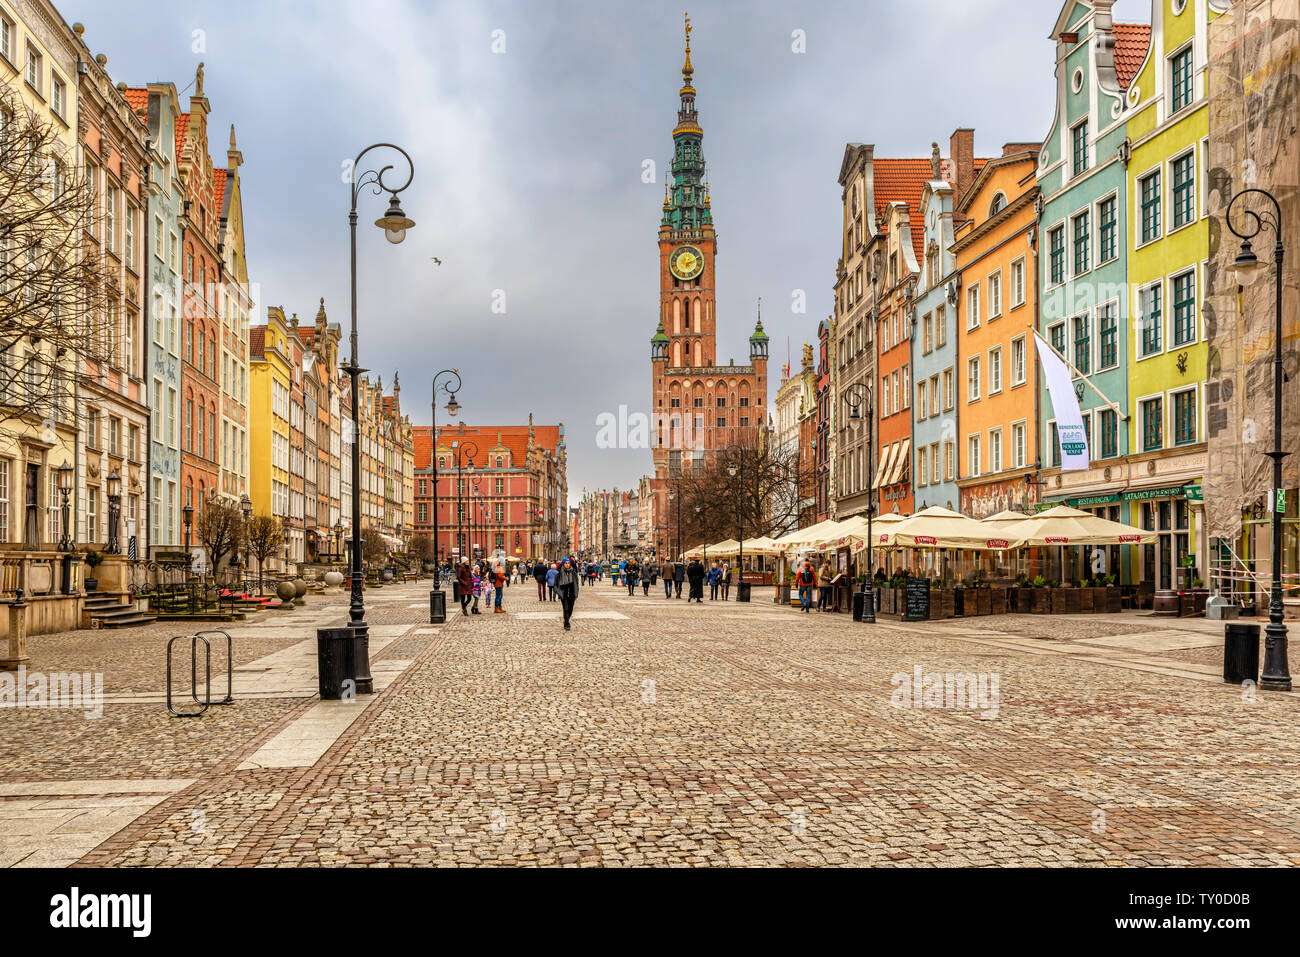 Gdansk, Poland – Feb 14, 2019: View at the houses and Town Hall building in Historic Old Town district city of Gdansk, Poland. Stock Photo